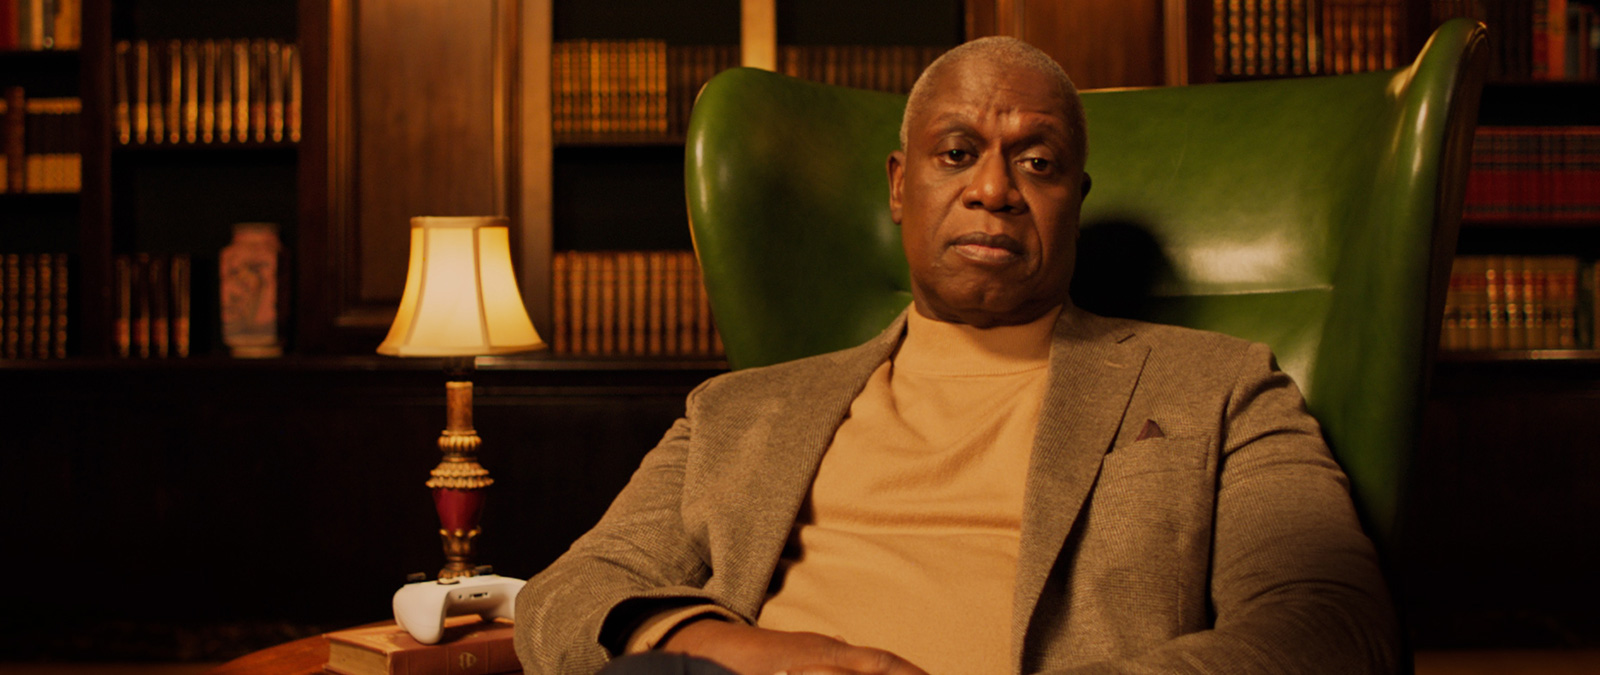 Andre Braugher reclines in a green chair, an Xbox controller on the end table.